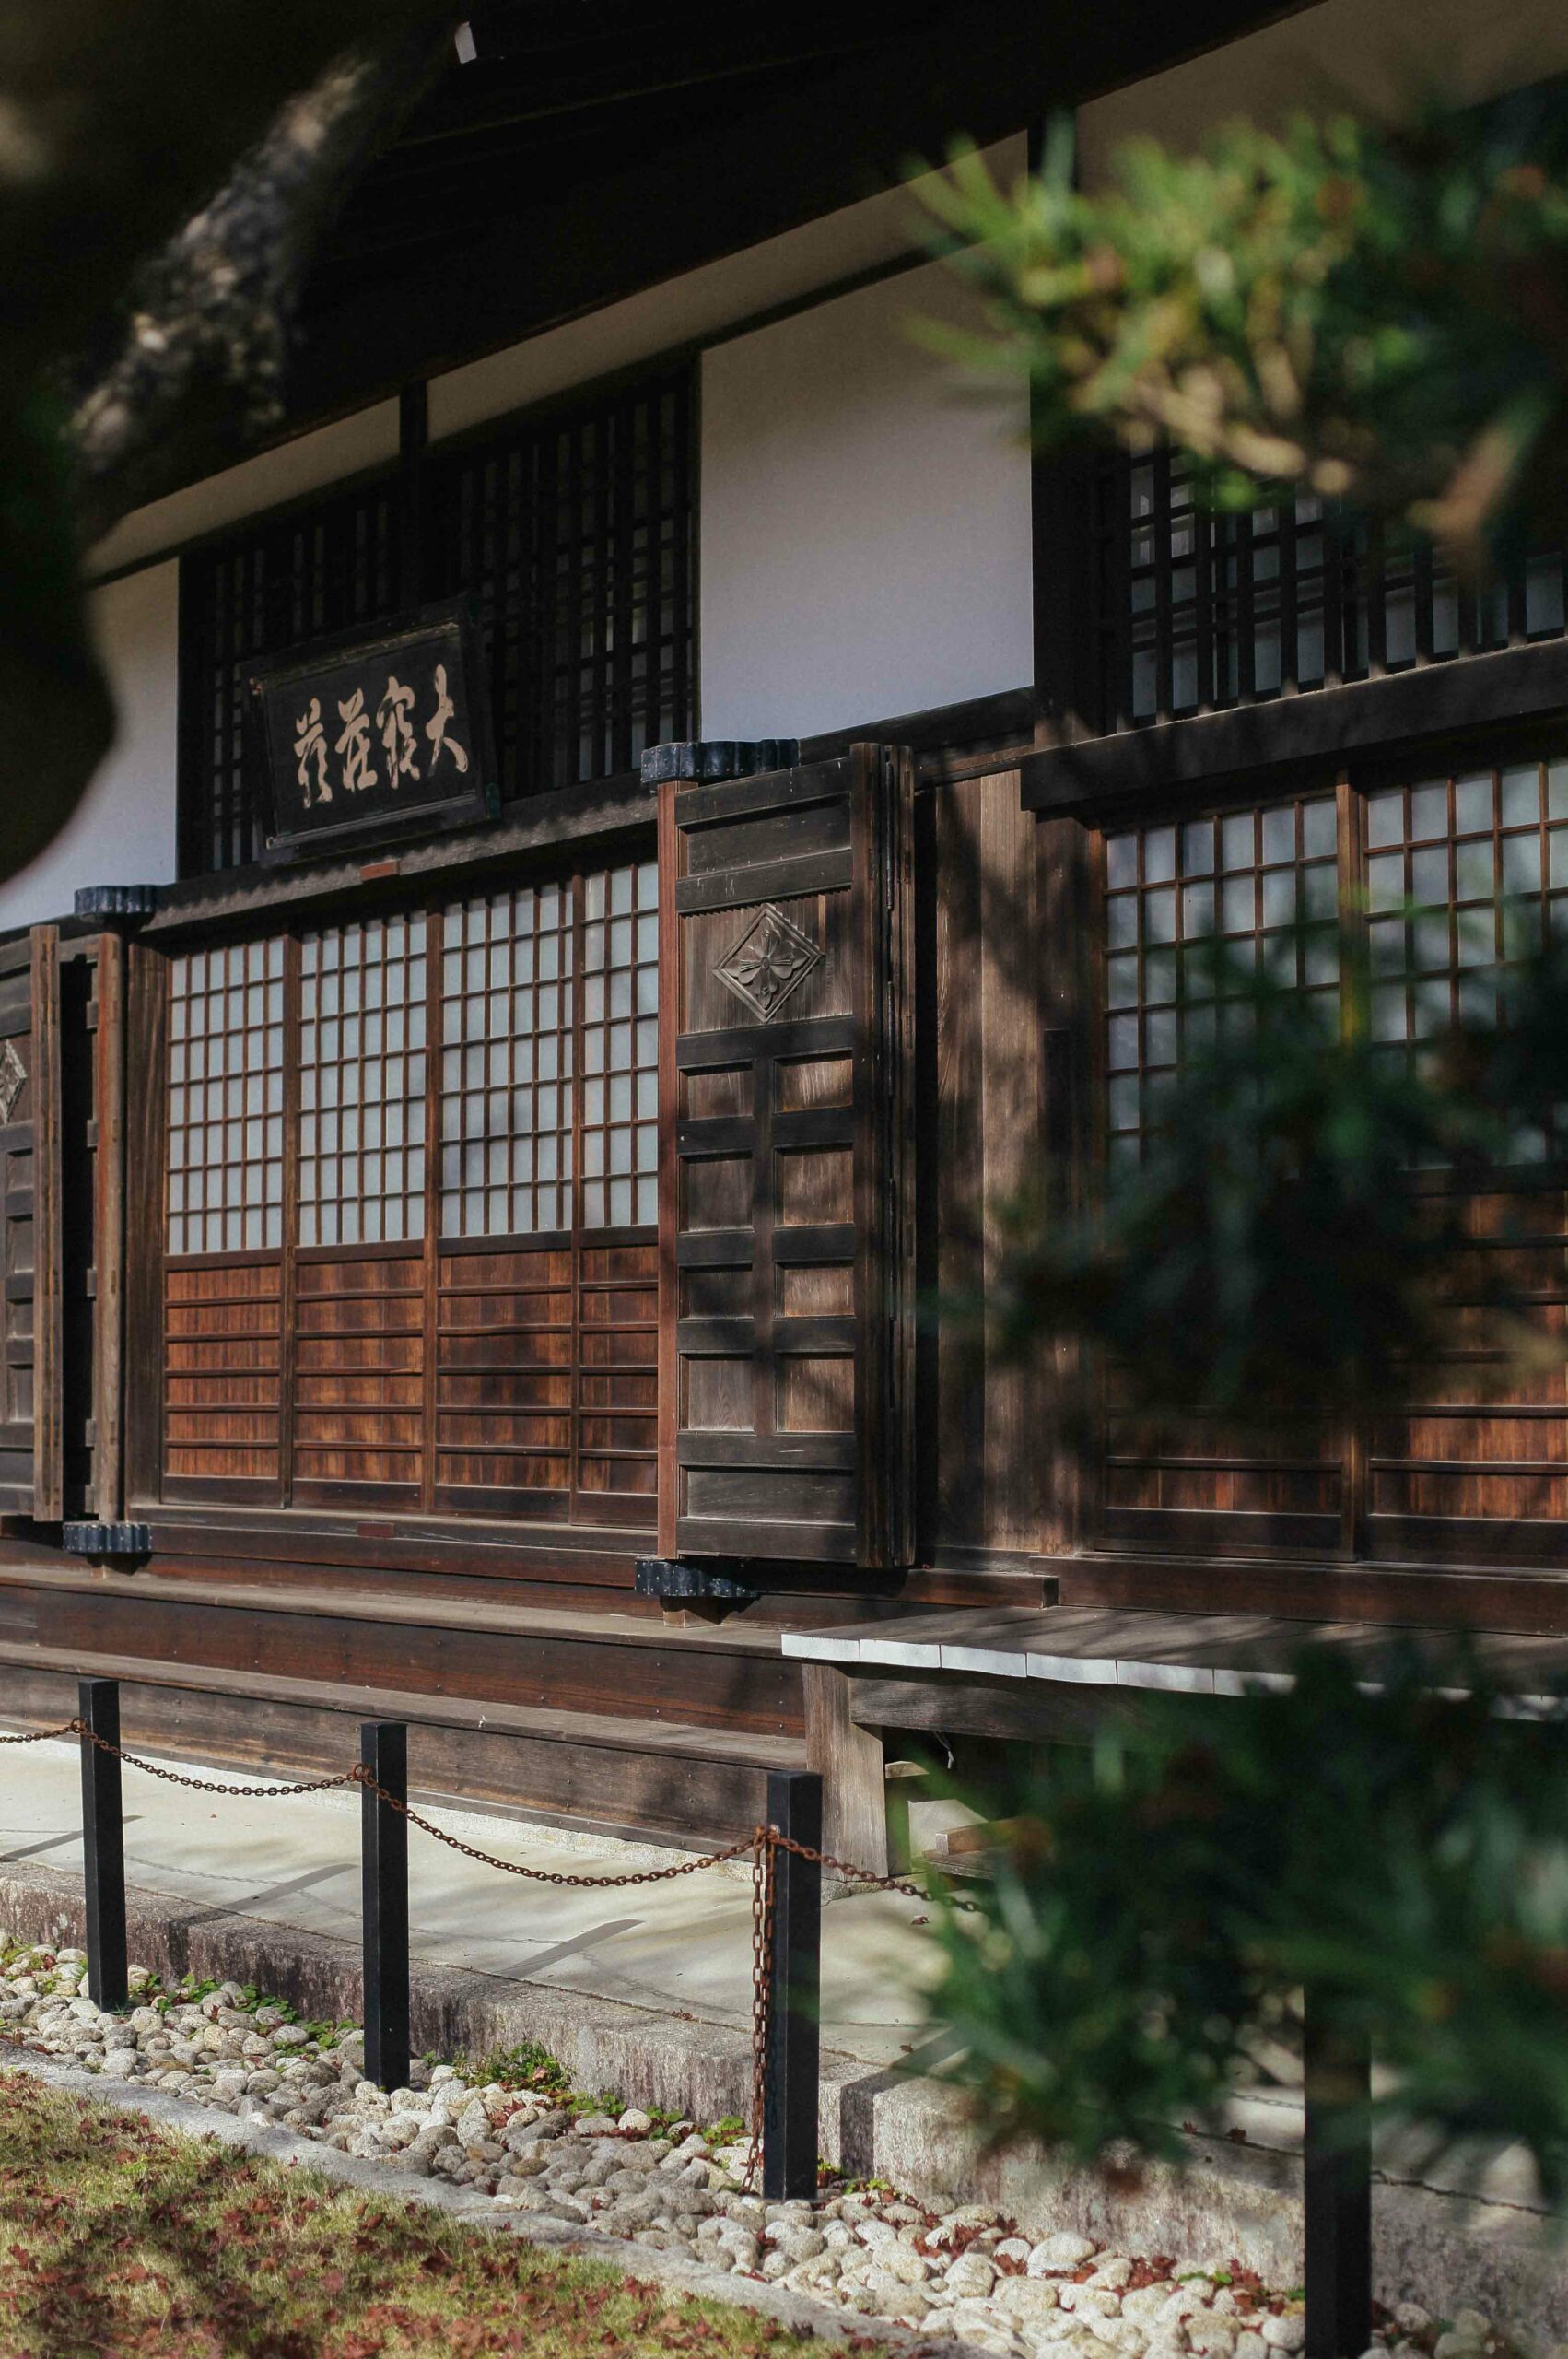 The temple is clad in warm-hued wood and shoji screens.